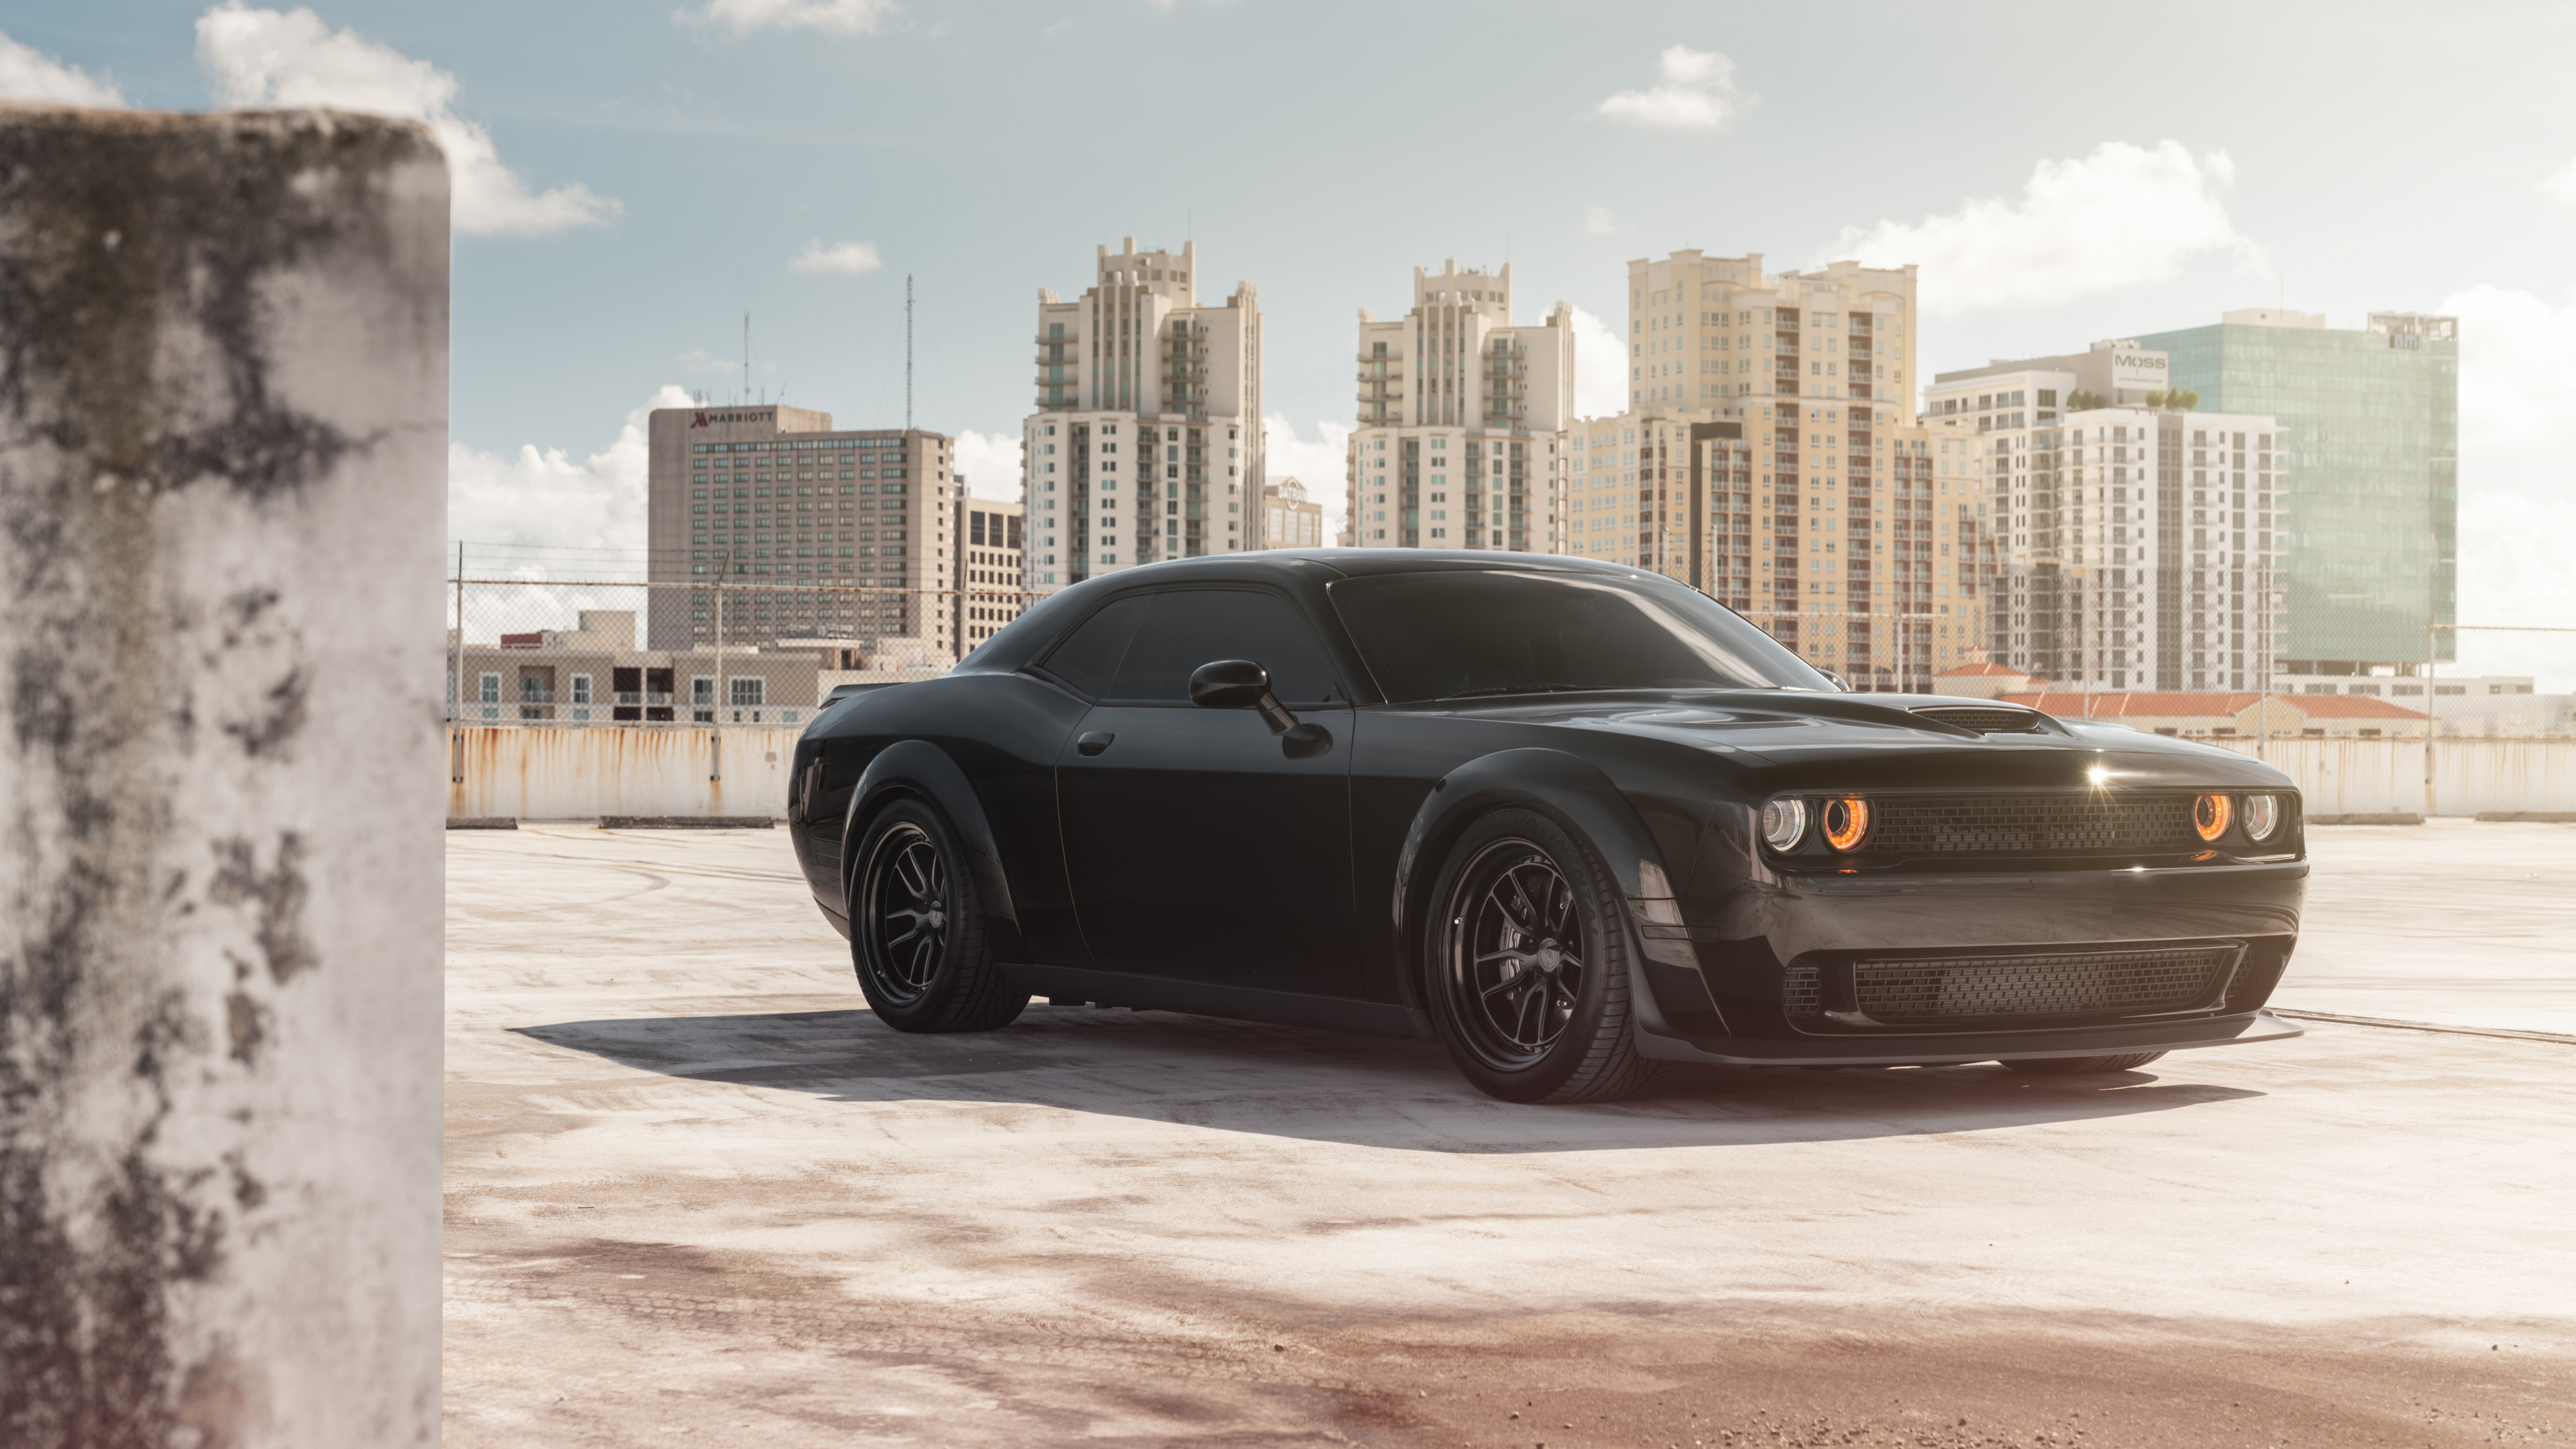 Black Coupe Parked on Gray Concrete Pavement During Daytime. Wallpaper in 7680x4320 Resolution